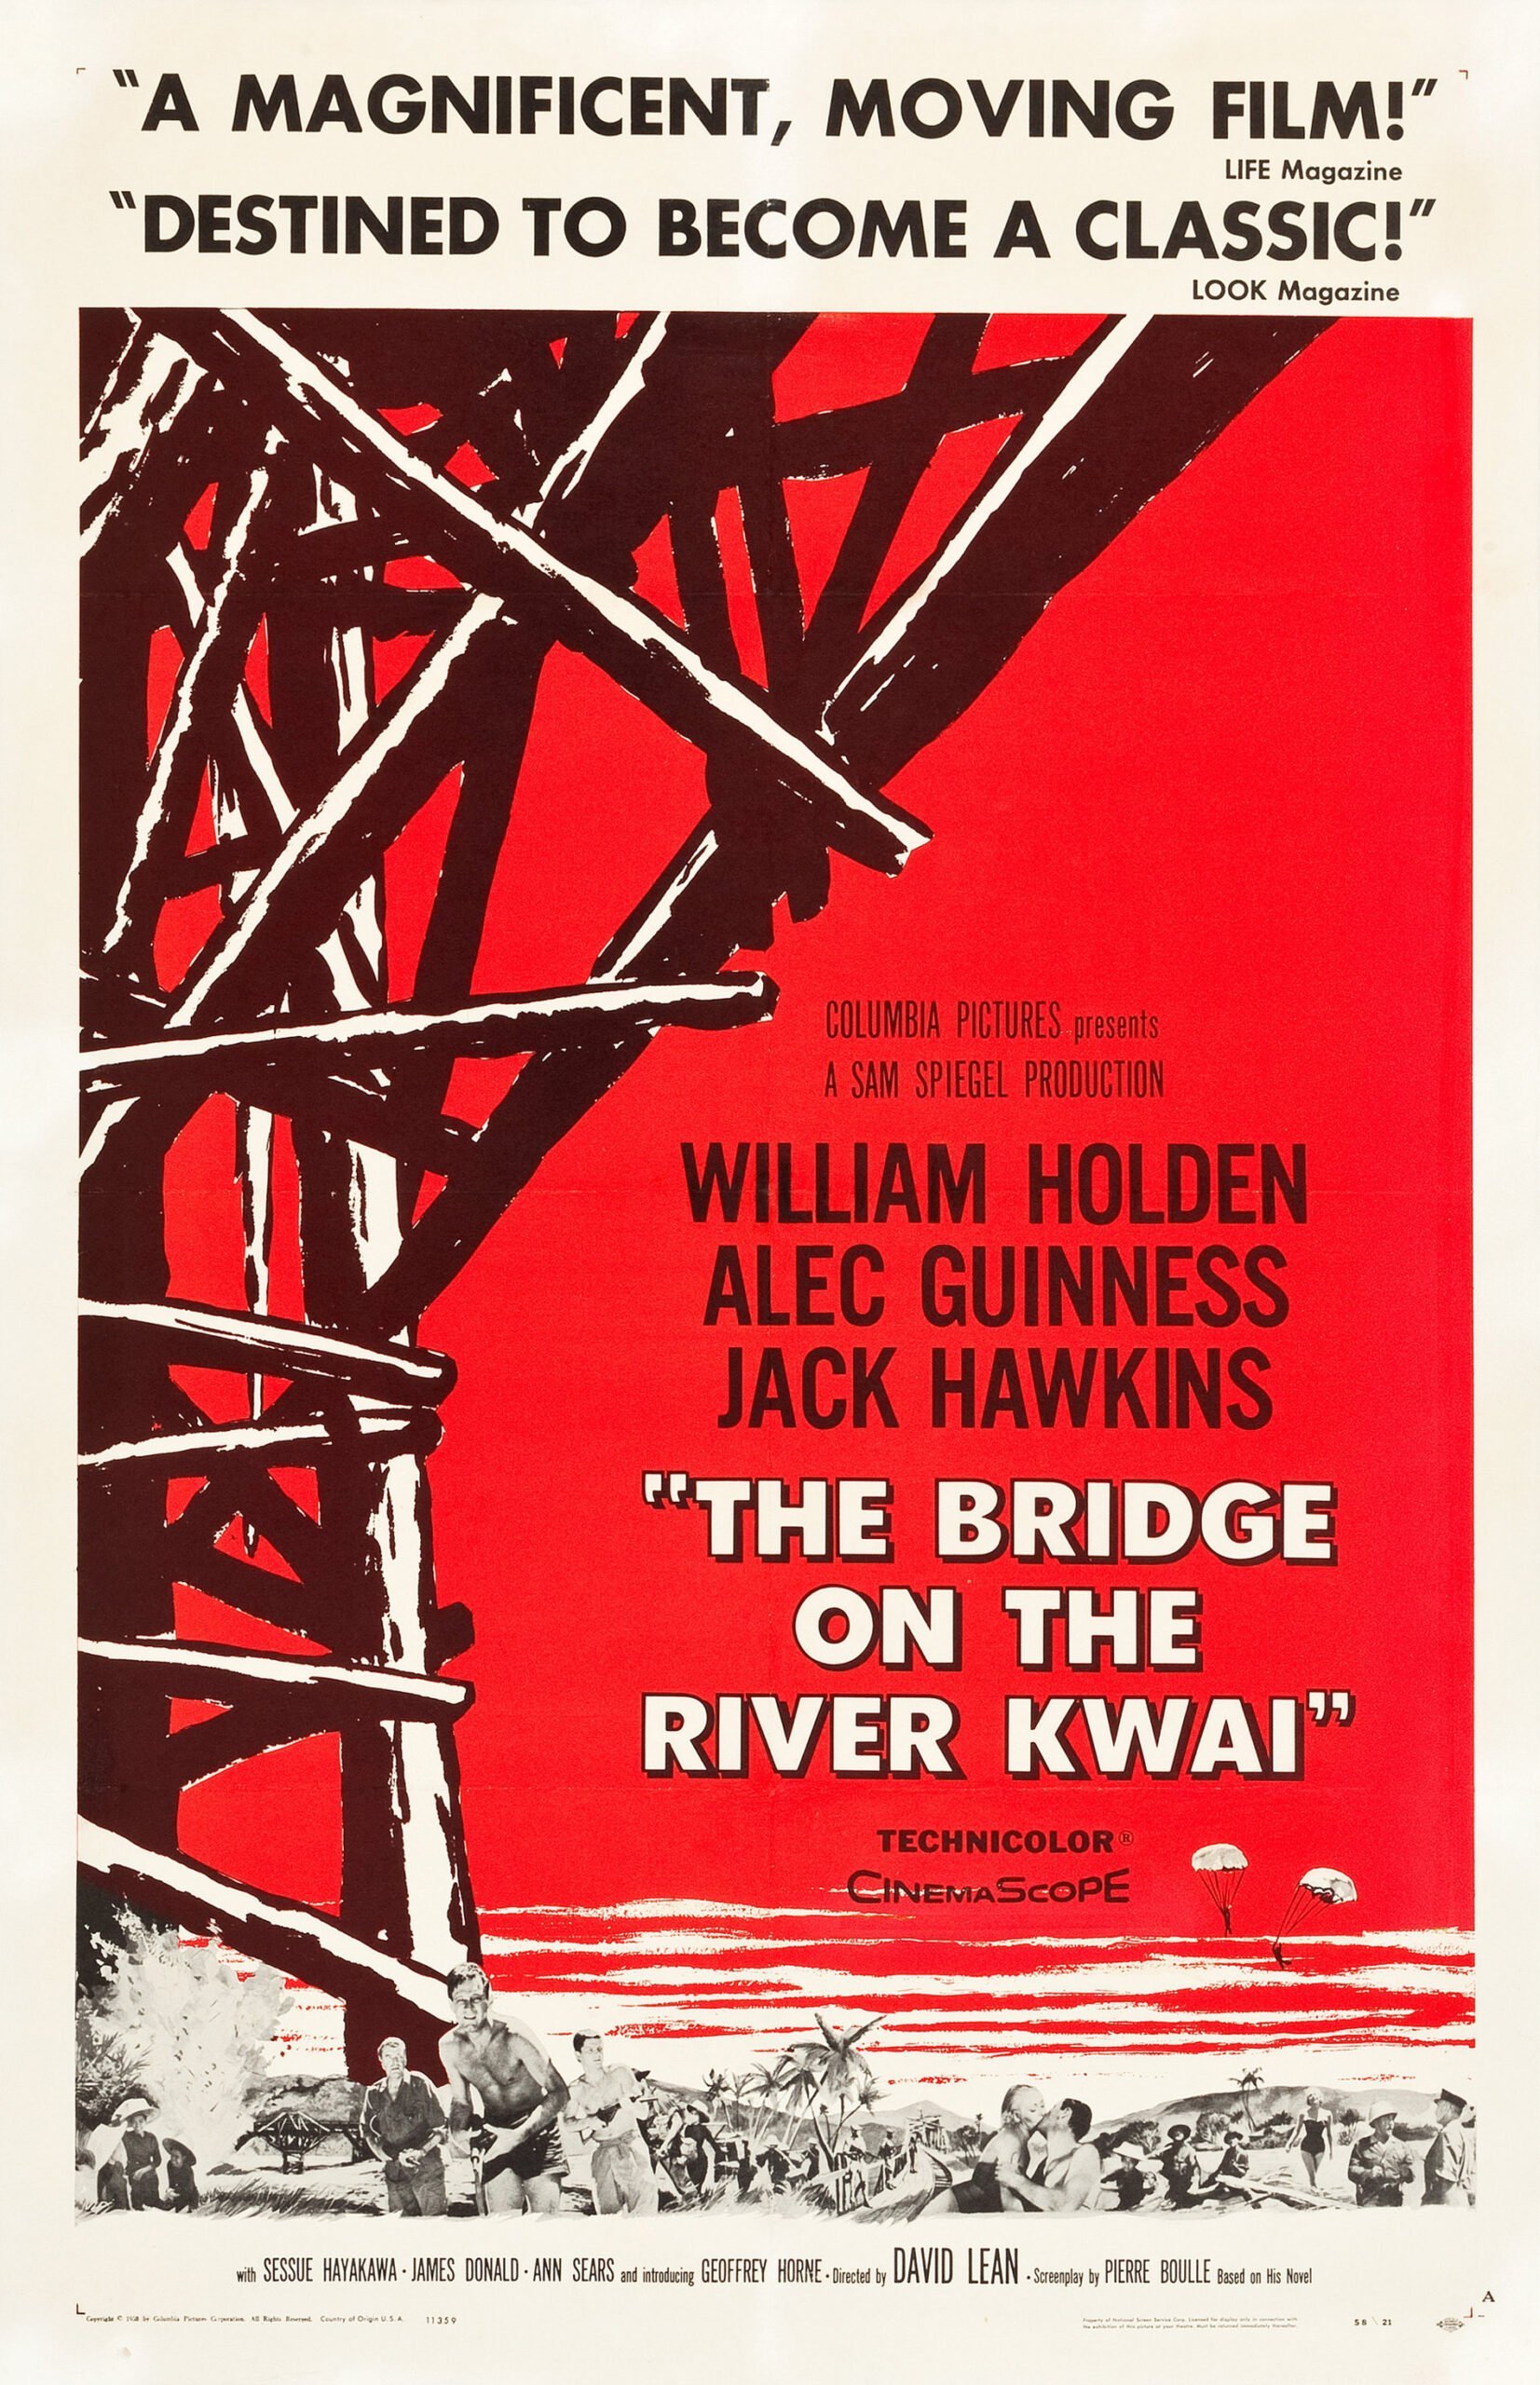 An original poster for the 1957 film The Bridge on the River Kwai, directed by David Lean